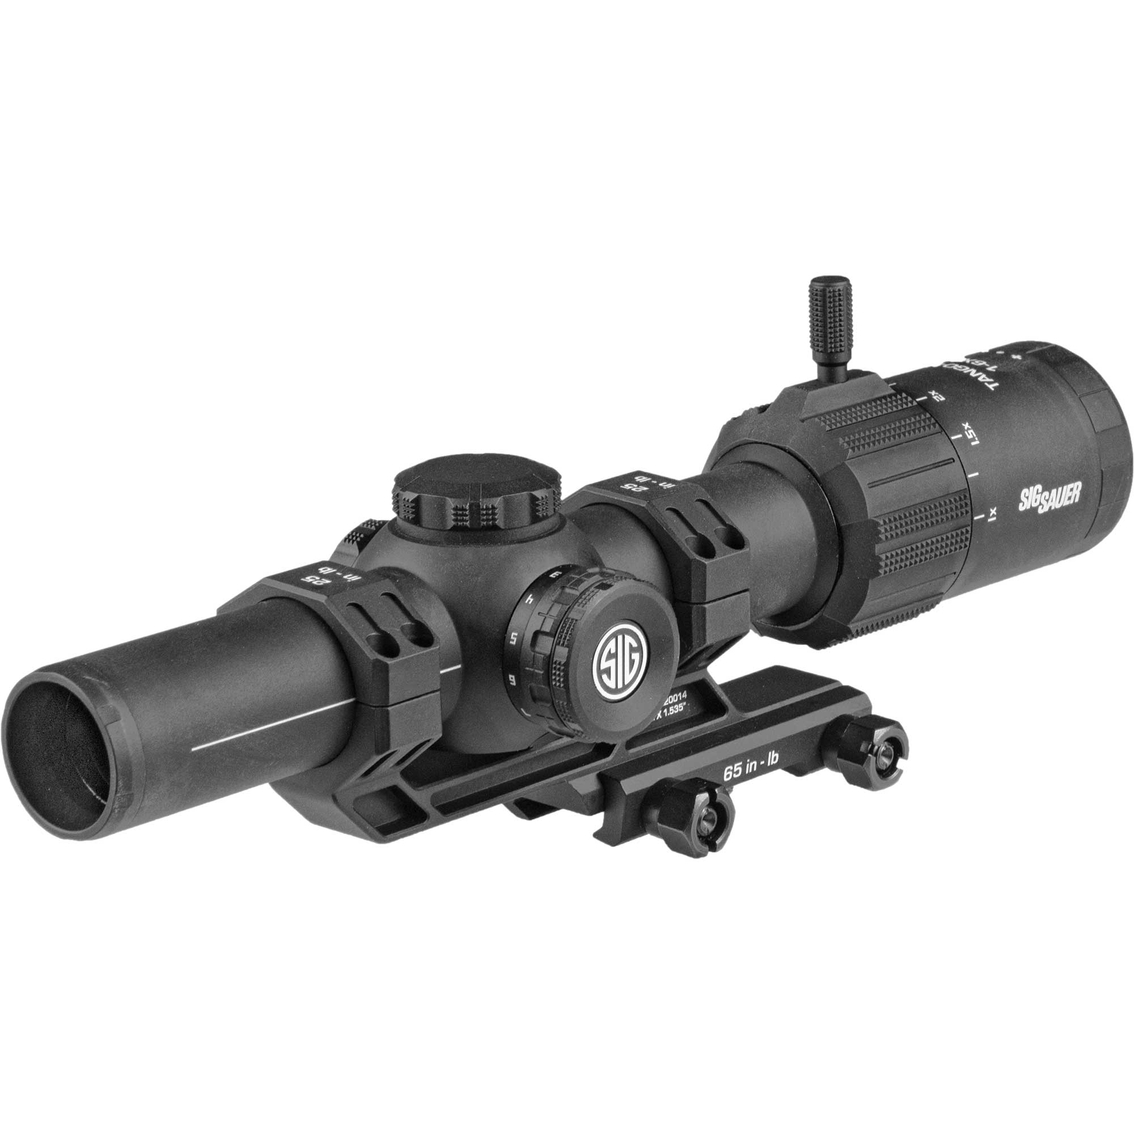 Sig Sauer Tango MSR 1-6x24mm Riflescope with MSR-BDC6 Reticle - Image 2 of 2